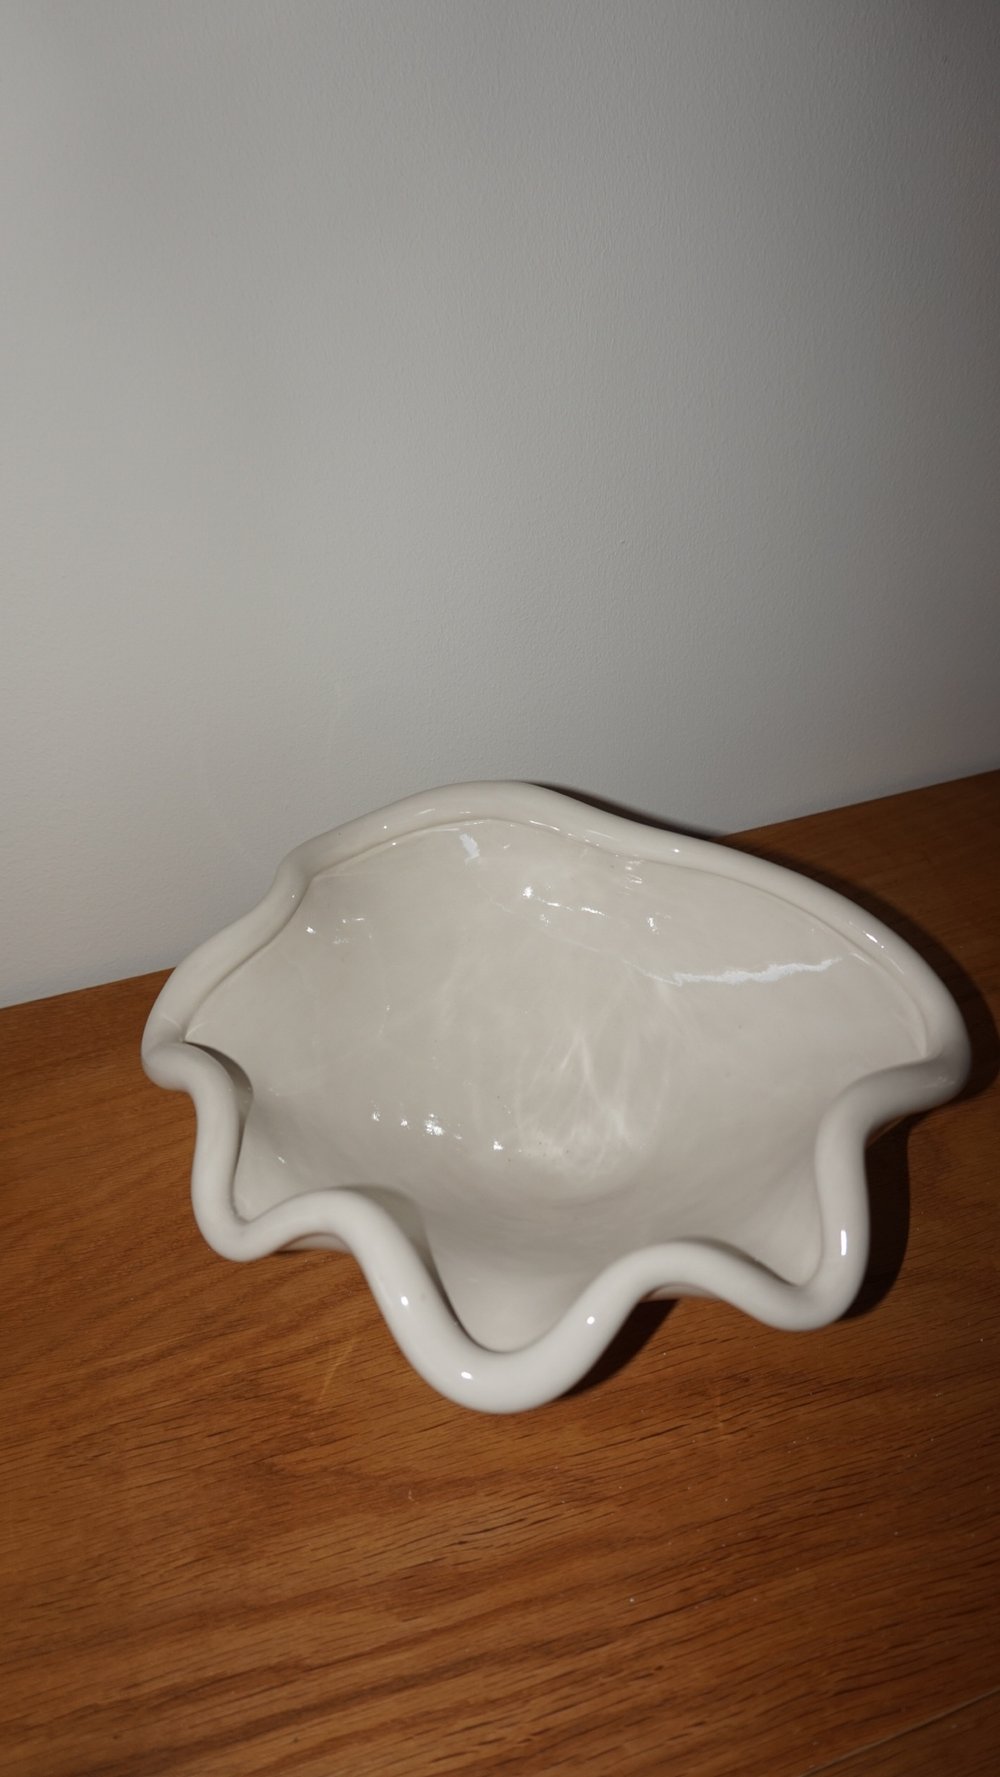 Image of "The snack bowl", cream